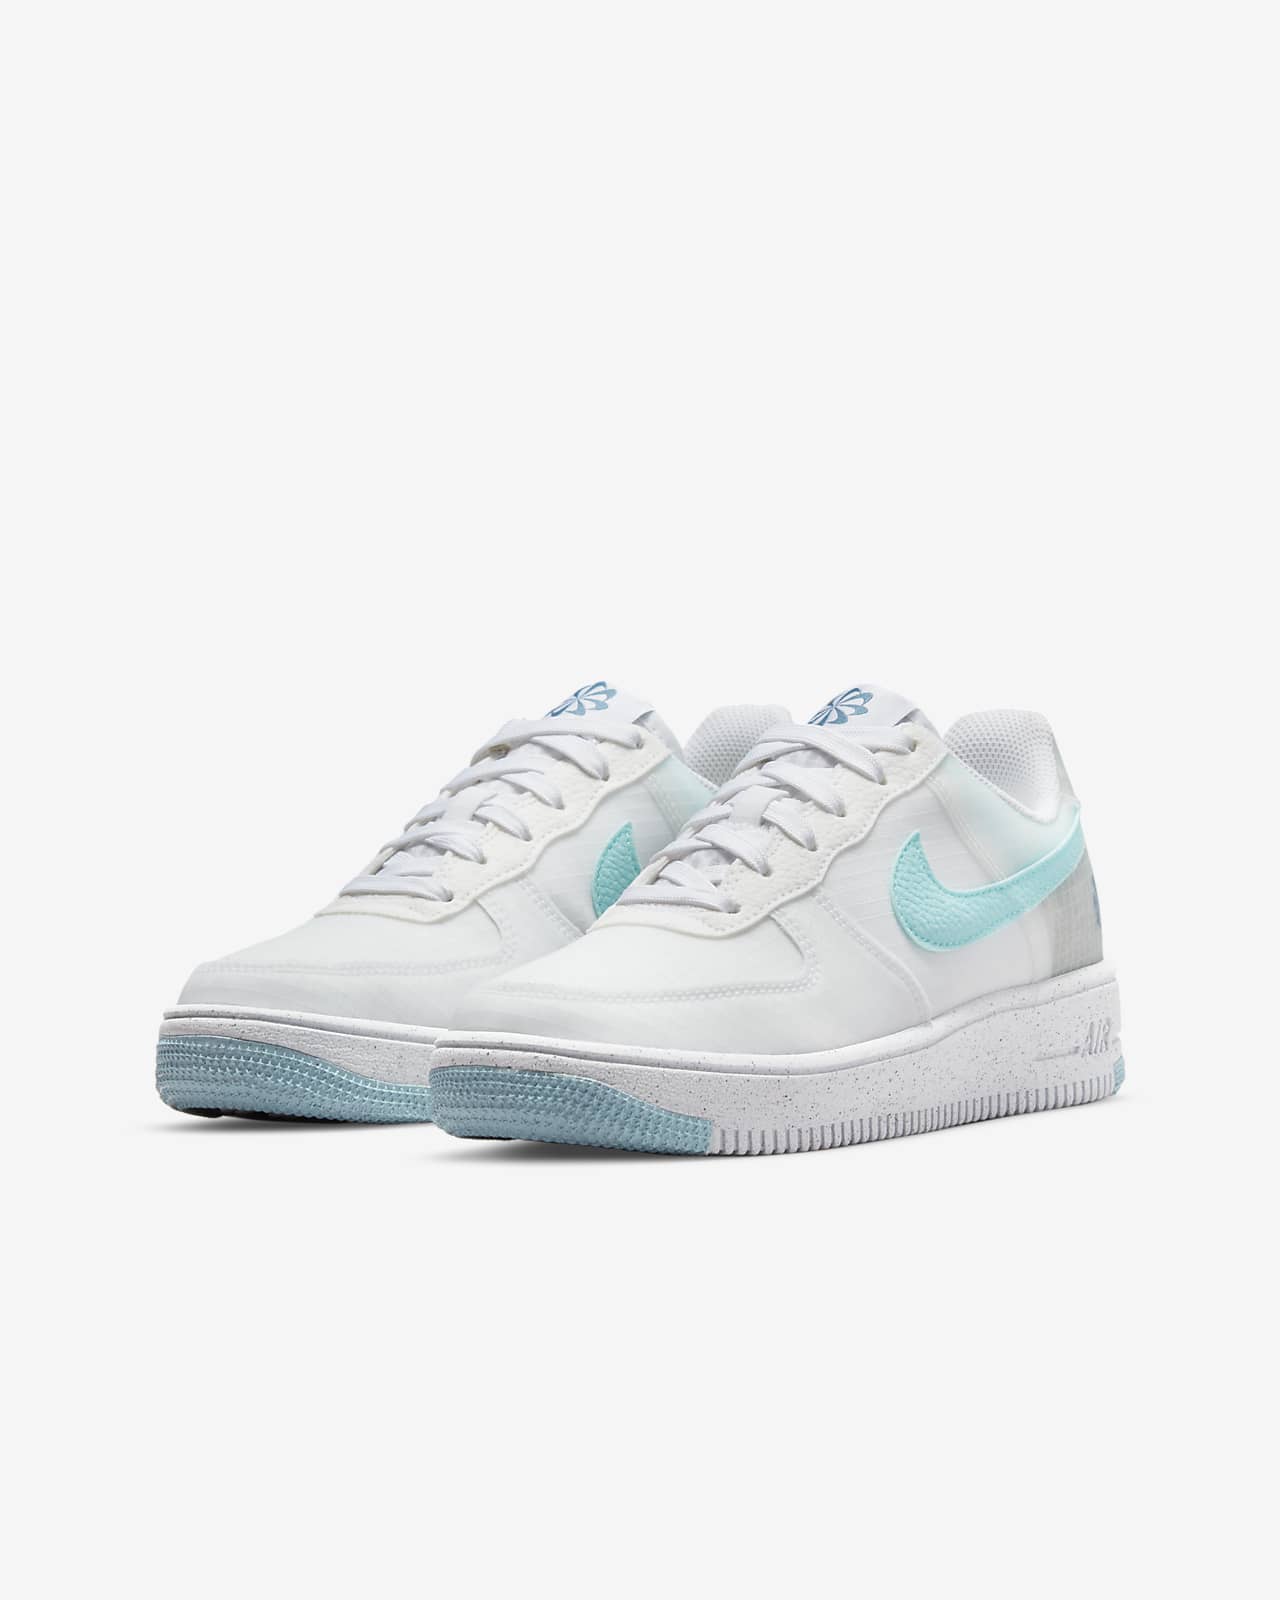 Wunsch Verbieten Sympathisch how to lace nike air force 1 Kombination ...